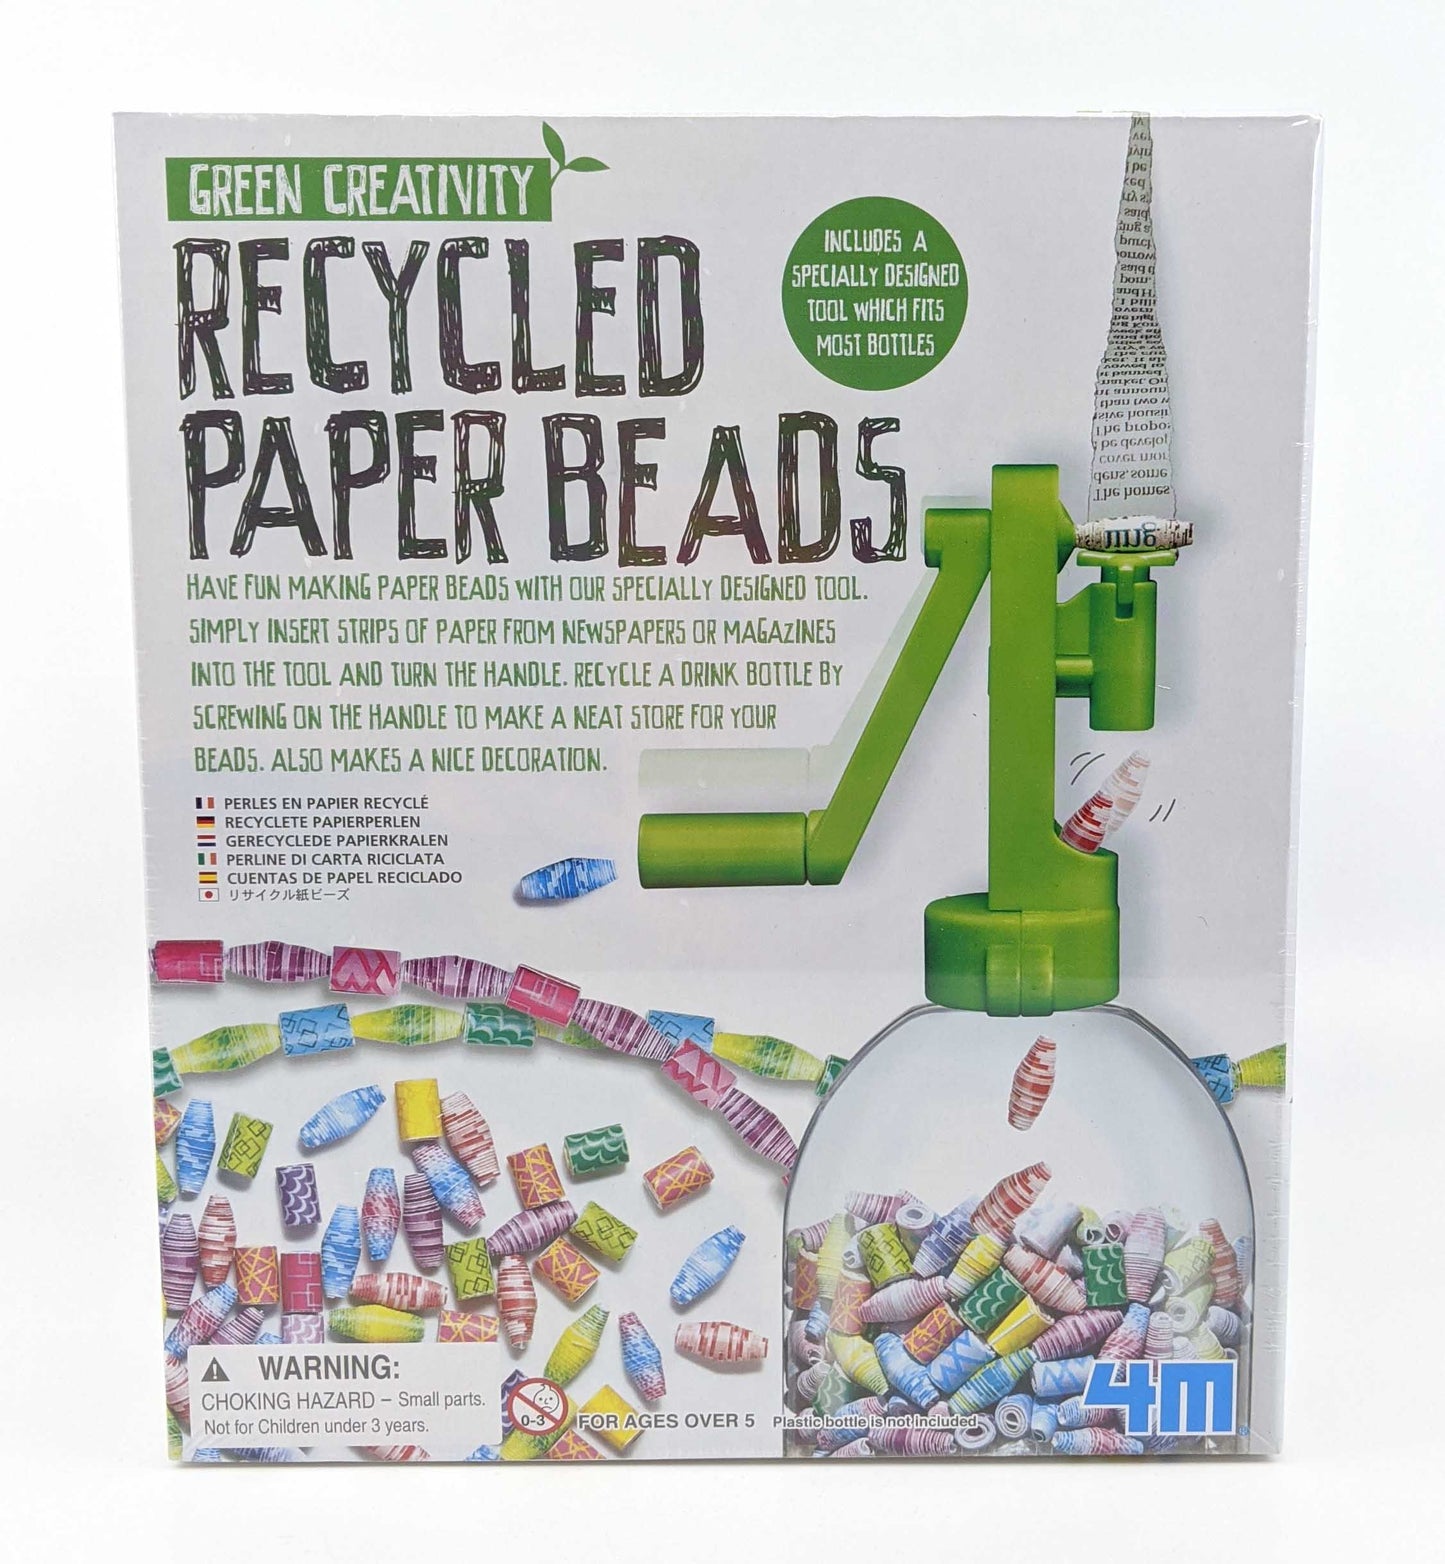 Recycled Paper Beads Kit